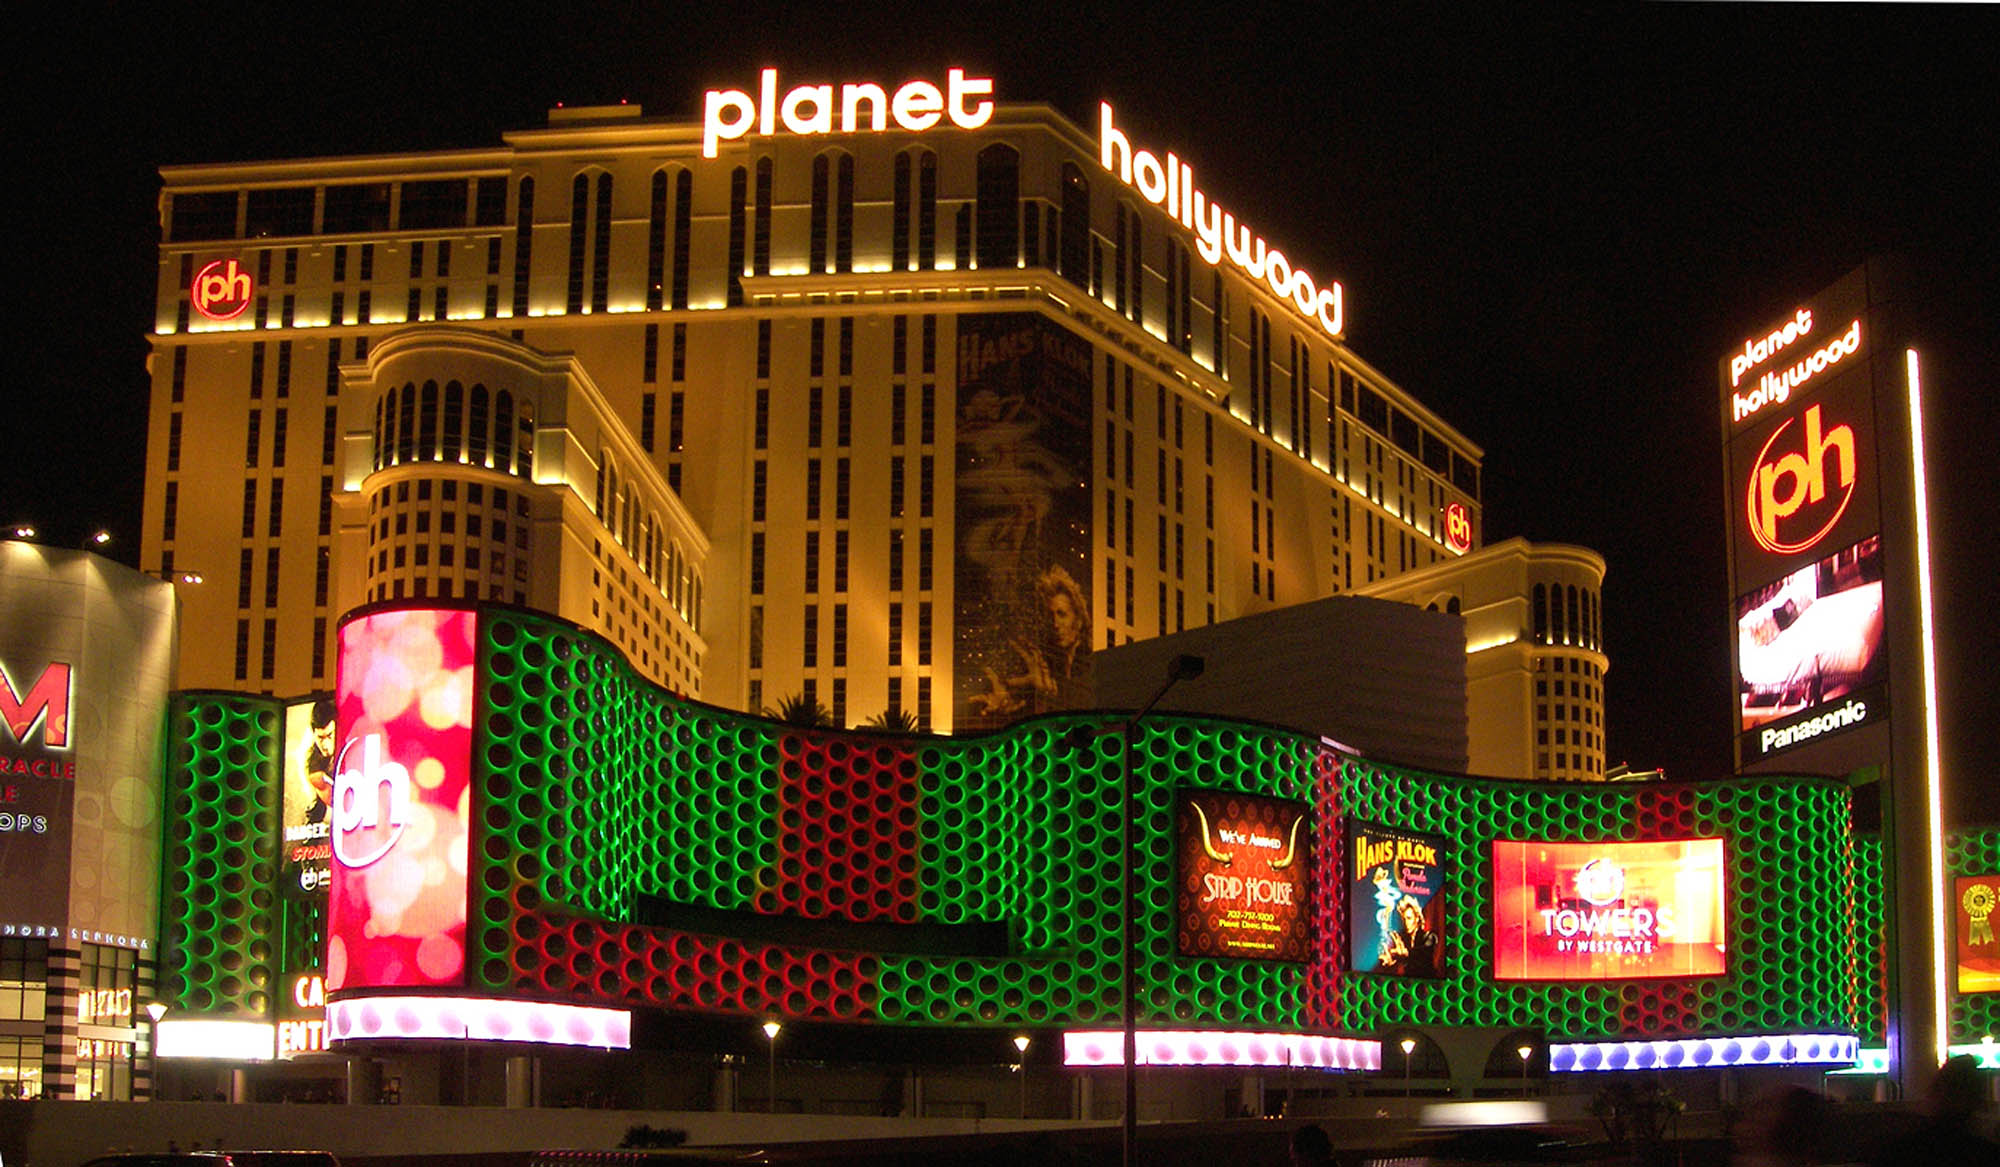 Linear LED lights illuminating architectural detail and the facade of a Planet Hollywood hotel. Boca Lighting and Controls